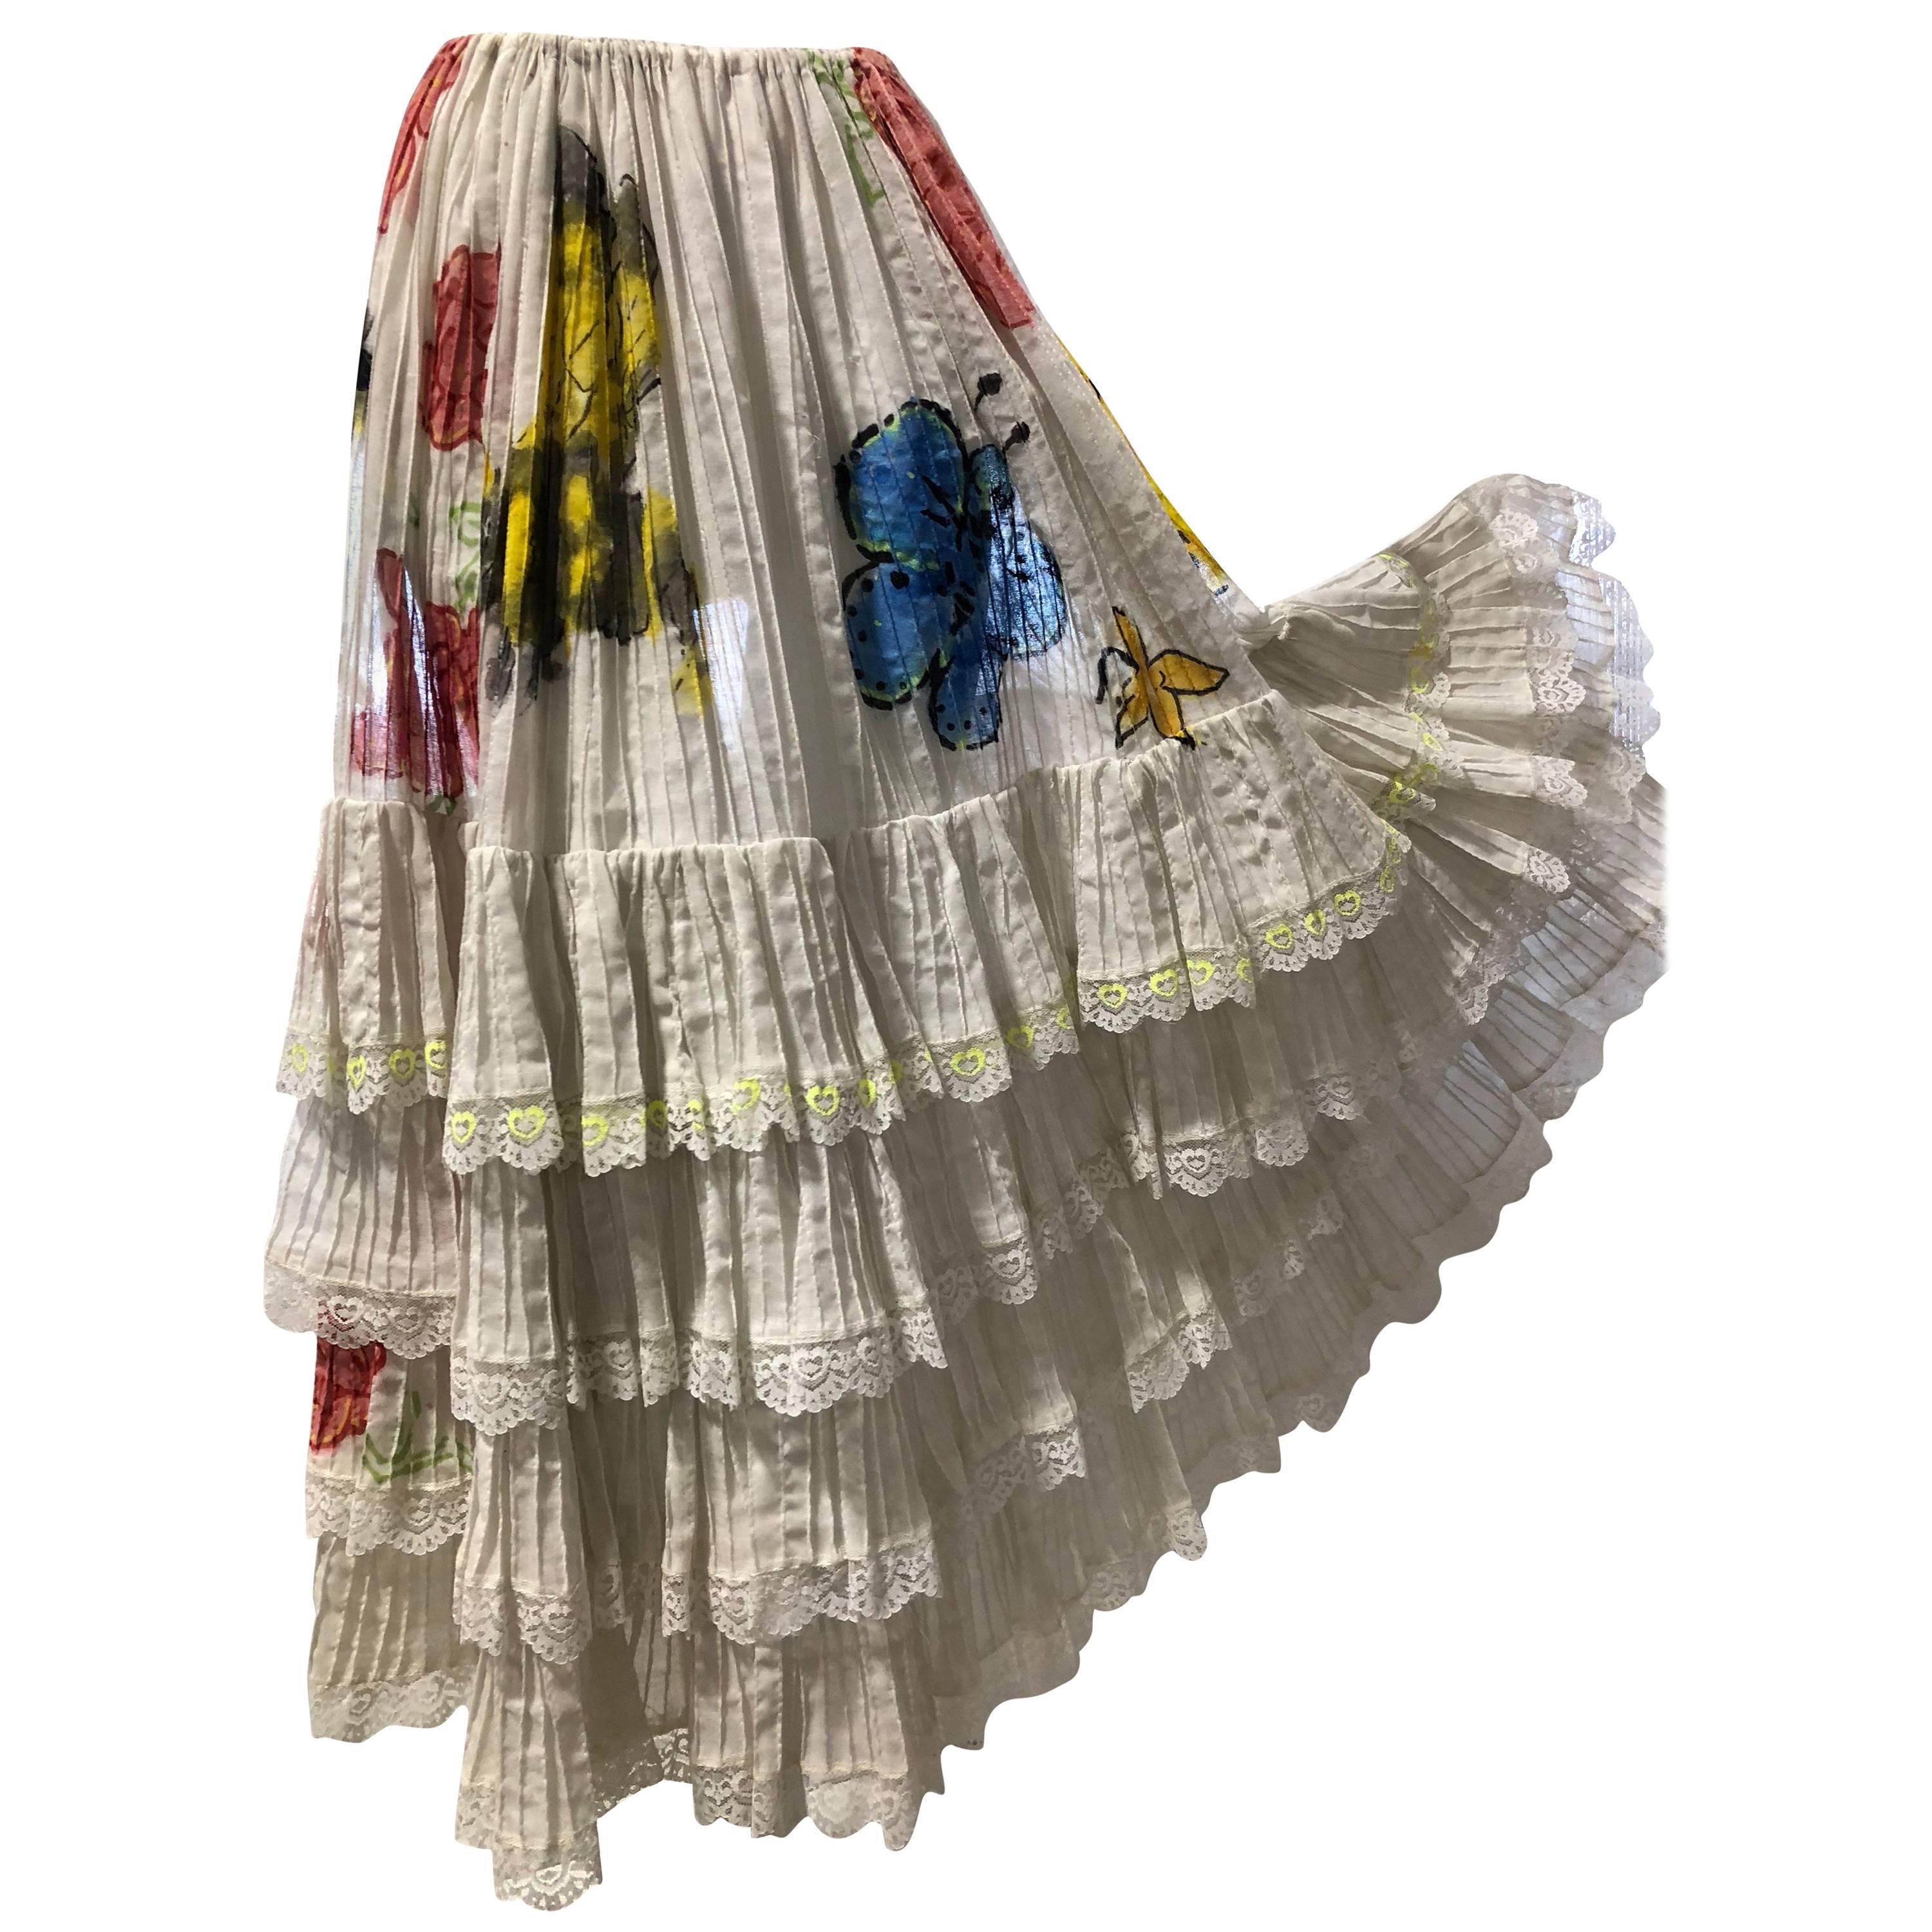 Mexican White Cotton Lace Tiered Skirt With Hand-Painted Bees and Florals, 60s 